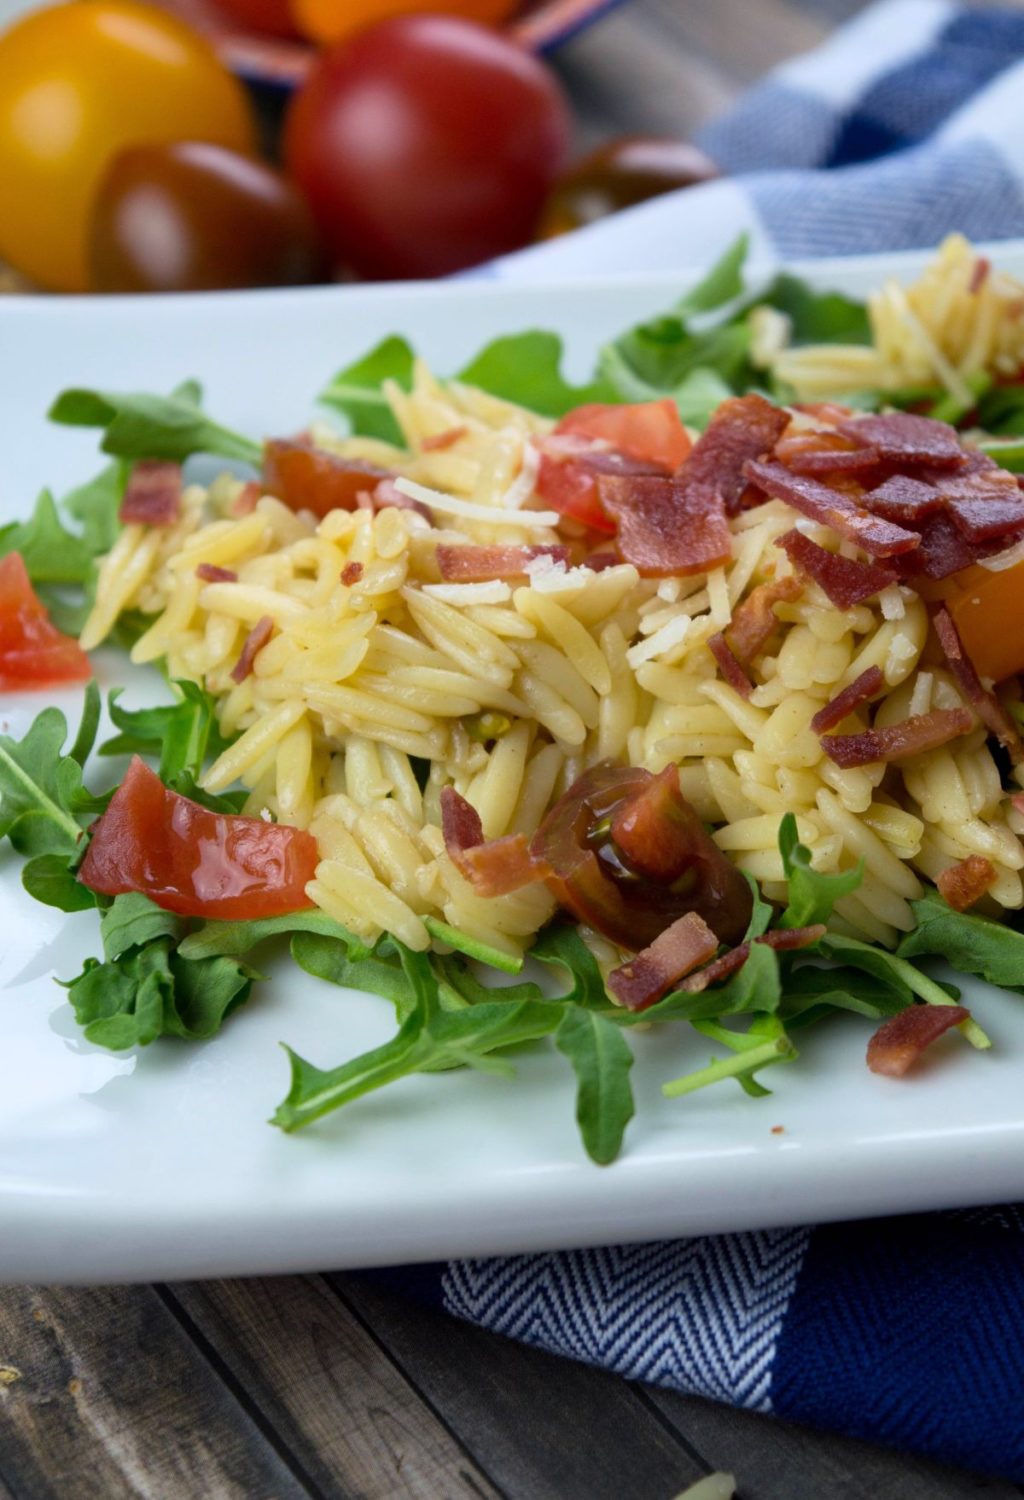 A plate of pasta with tomatoes and bacon.